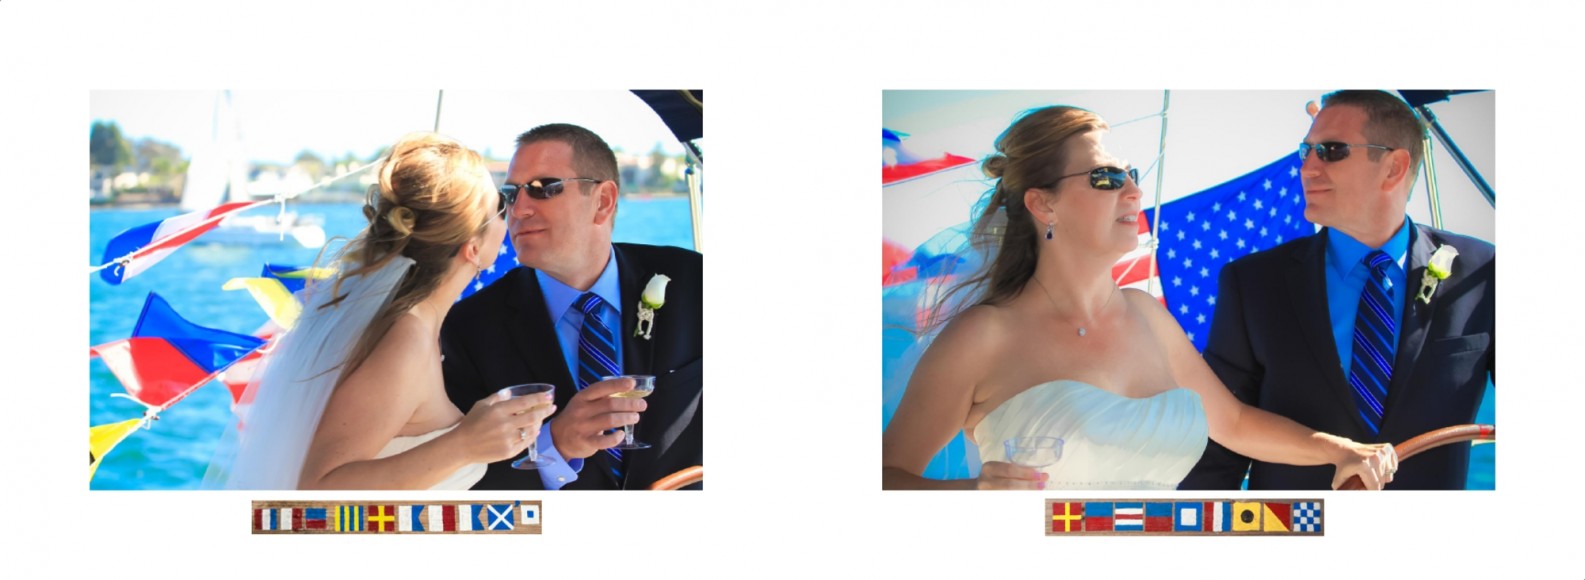 Laura and Davids Wedding Book - San Diego Yacht Wedding by Wedding Photographers Andrew Abouna - Pages 30-31